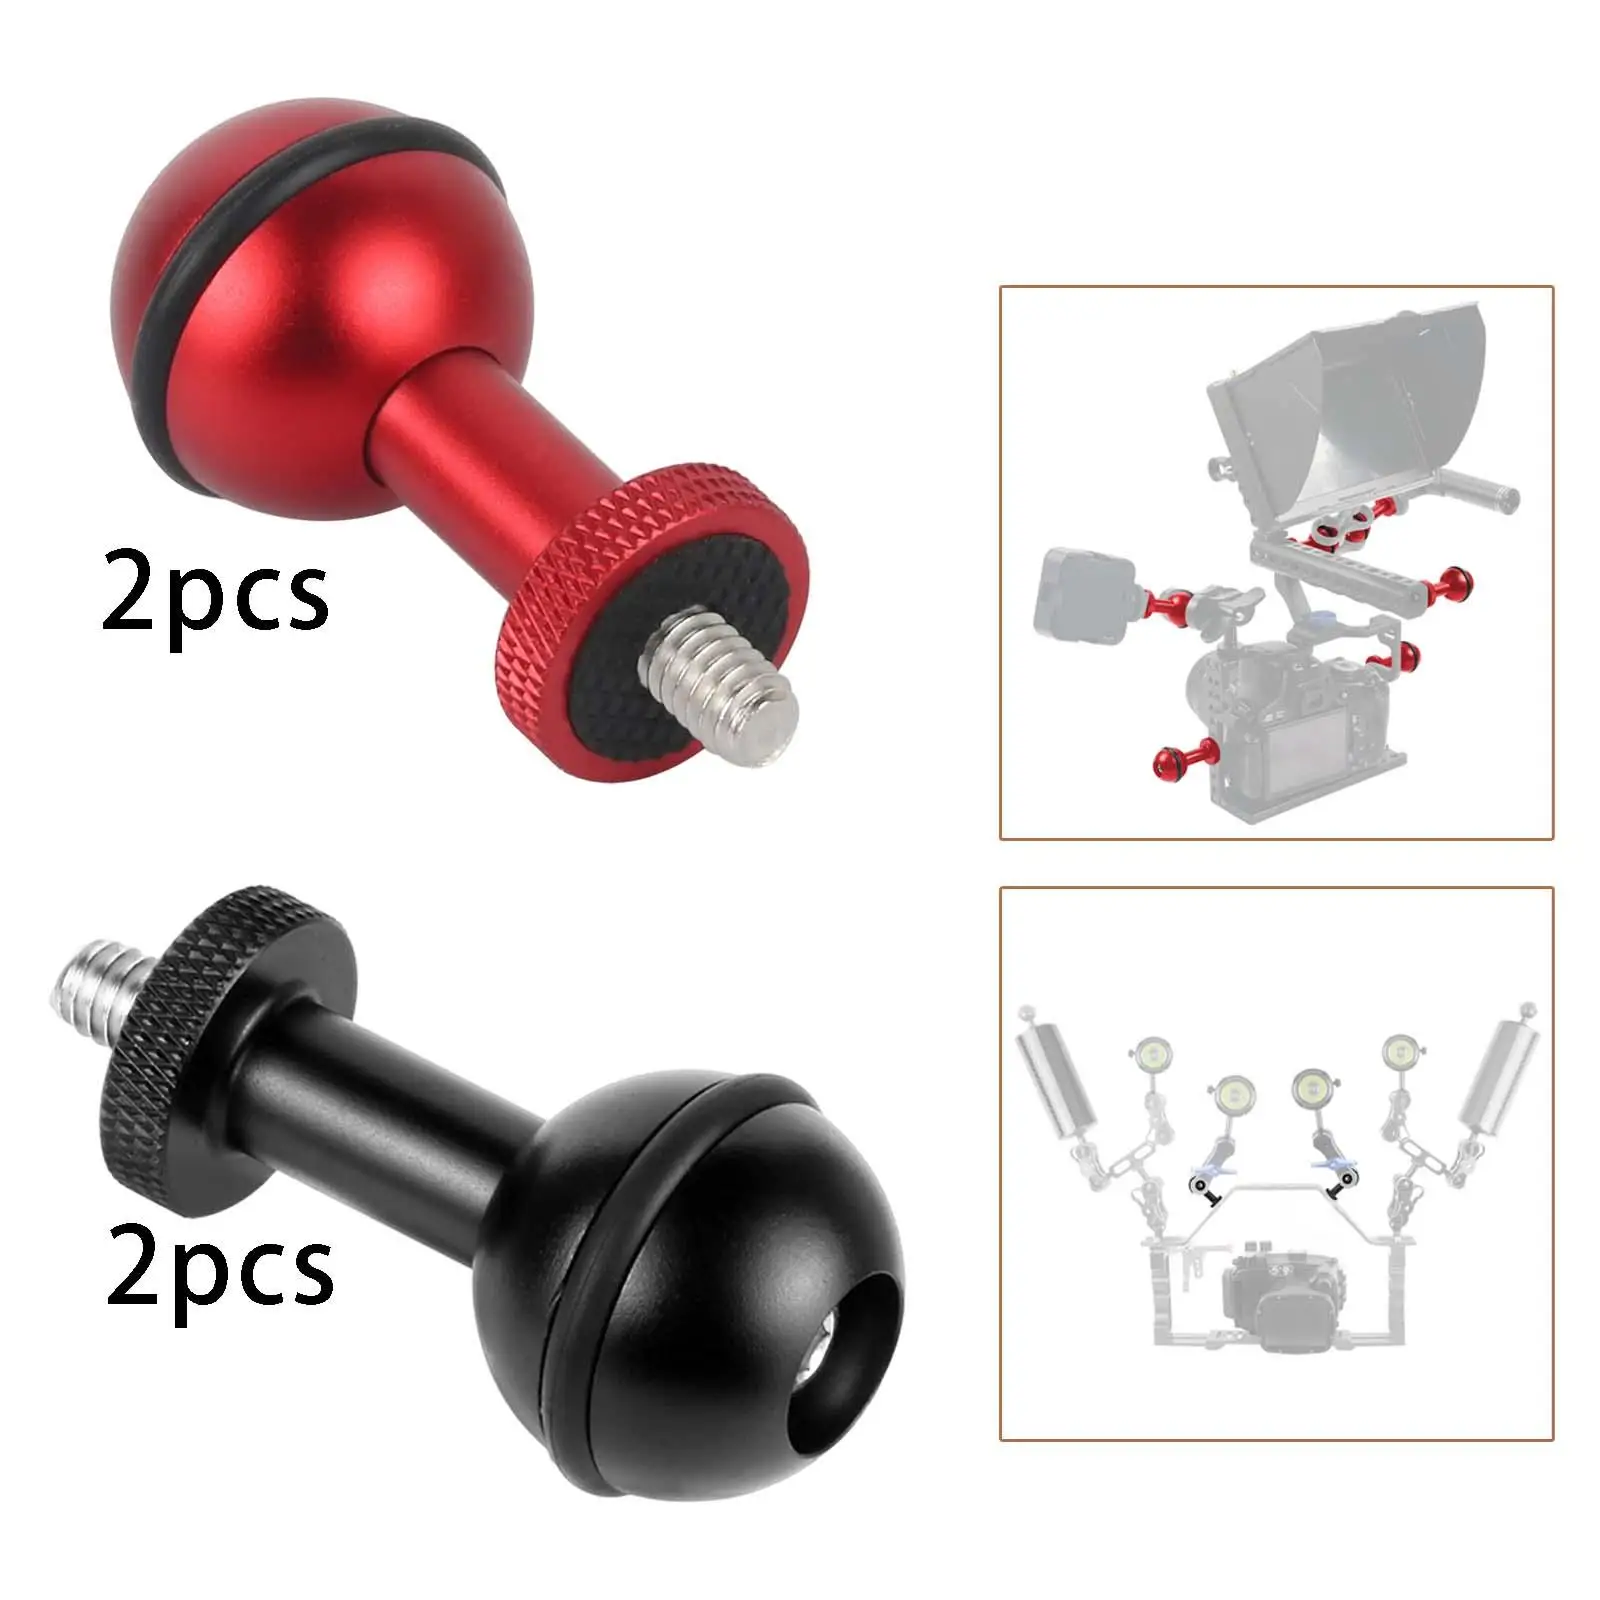 1inch Ball Head Adapter Photography Bracket Parts Fixed Mount Camera Screw Mount Adapter Parts for Camera Underwater Diving